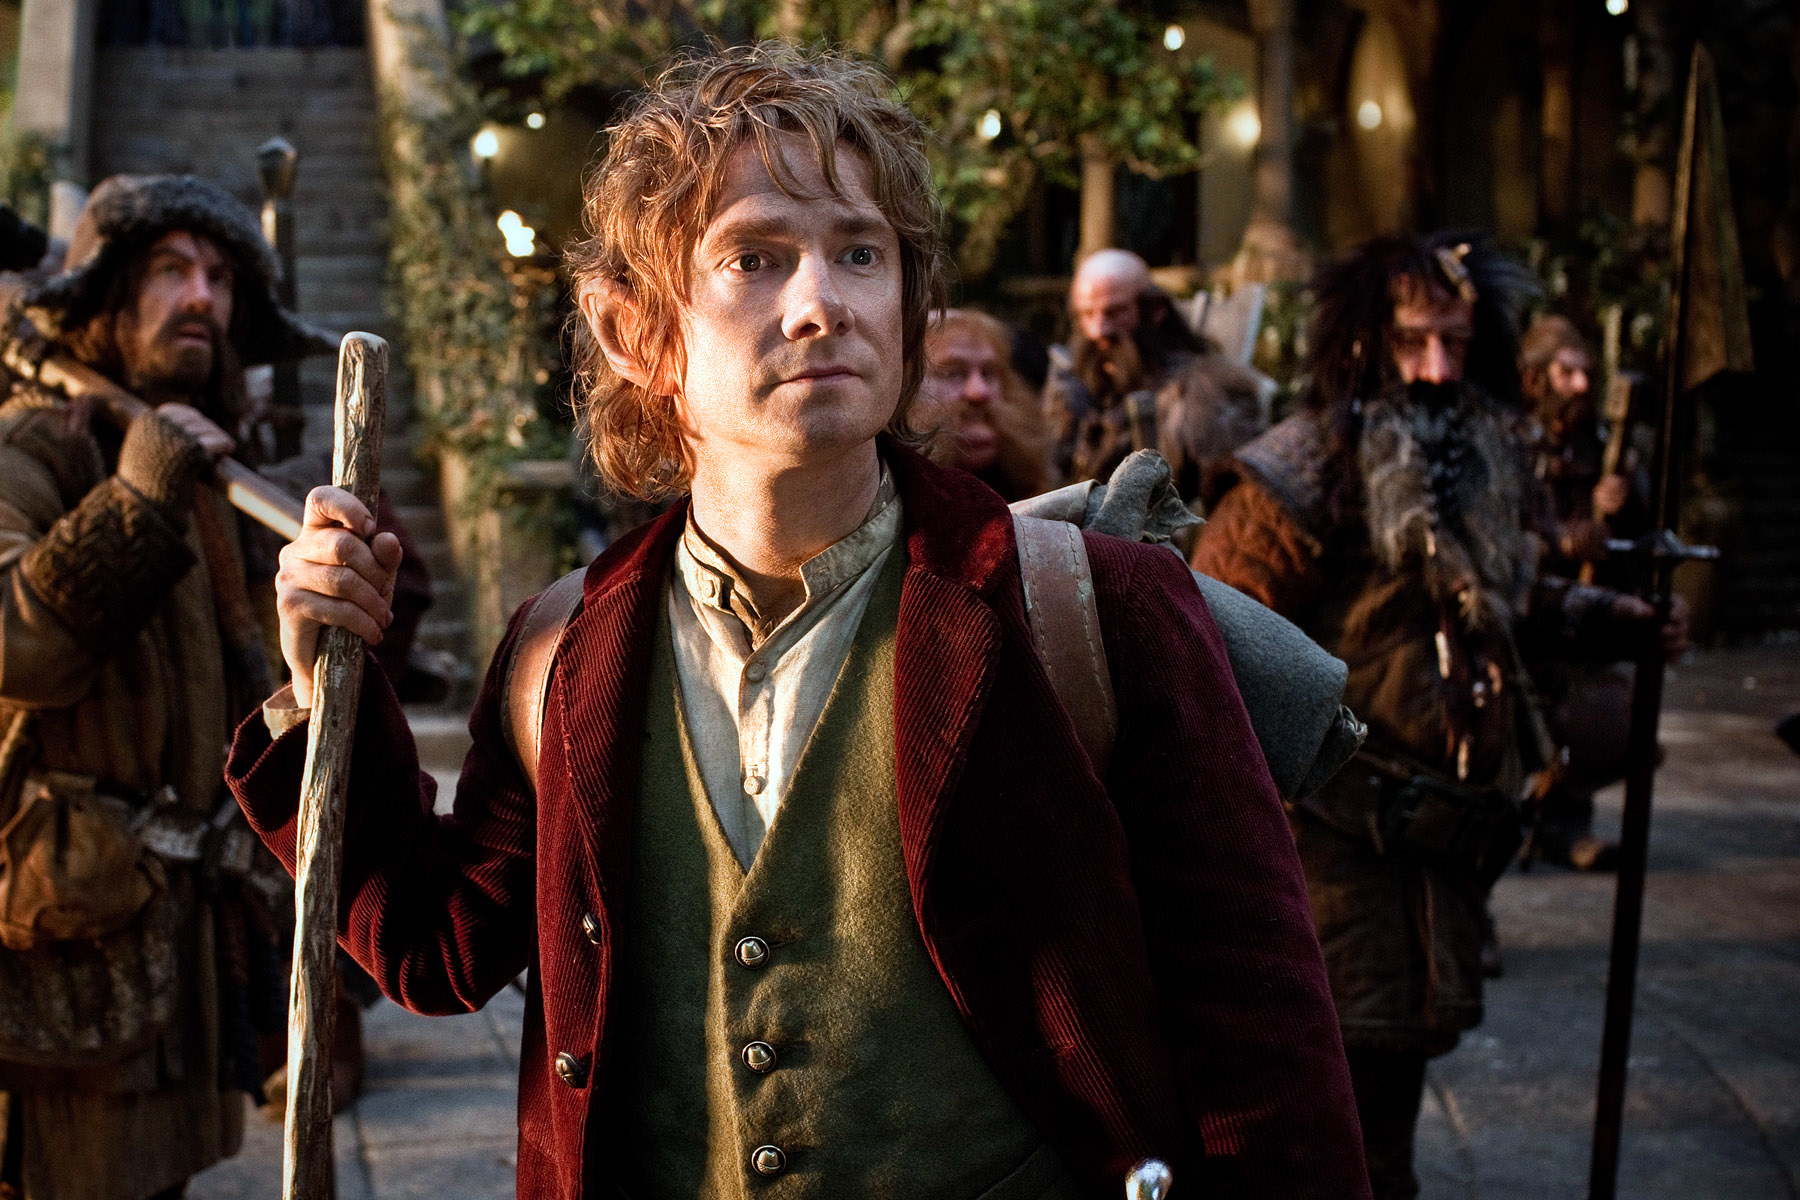 Bilbo Baggins stands with a group of dwarves in a scene from The Hobbit